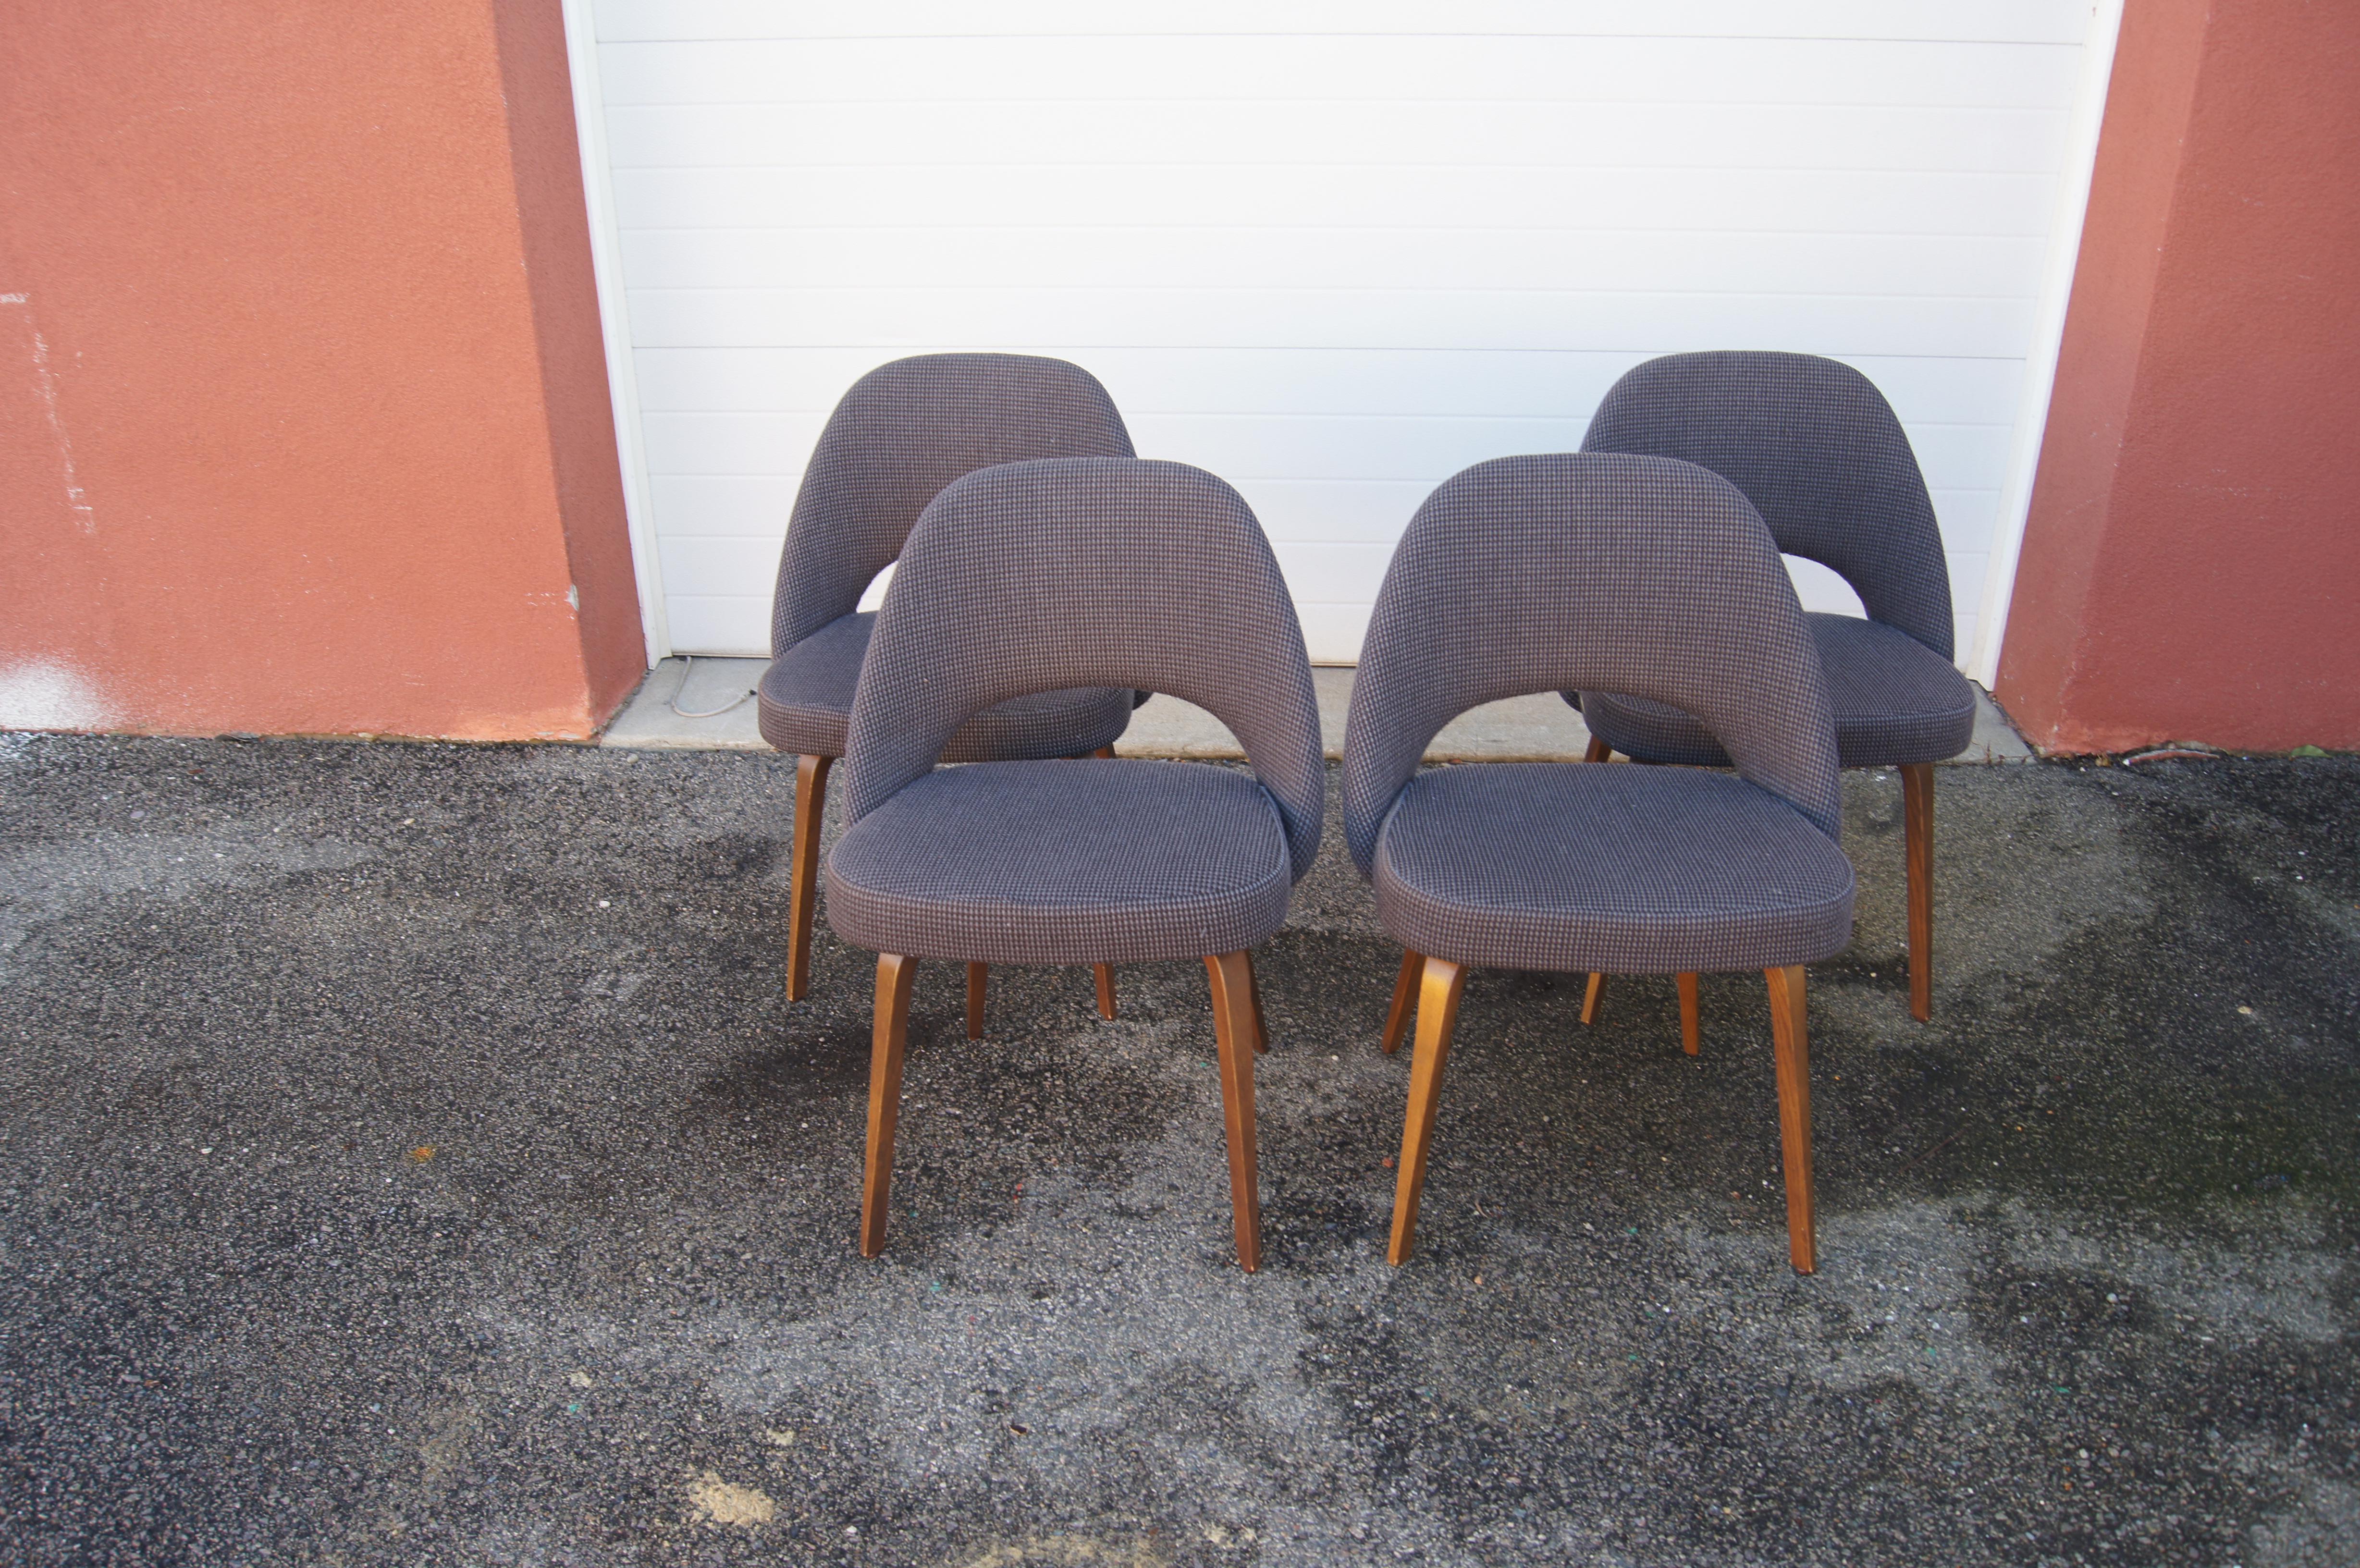 Designed by Eero Saarinen and introduced by Knoll in 1950, the now-classic executive side chair, model 72, has an organic, sculptural form and a comfortable seat that equally suits a dining room as it does a conference room. This set of four, a